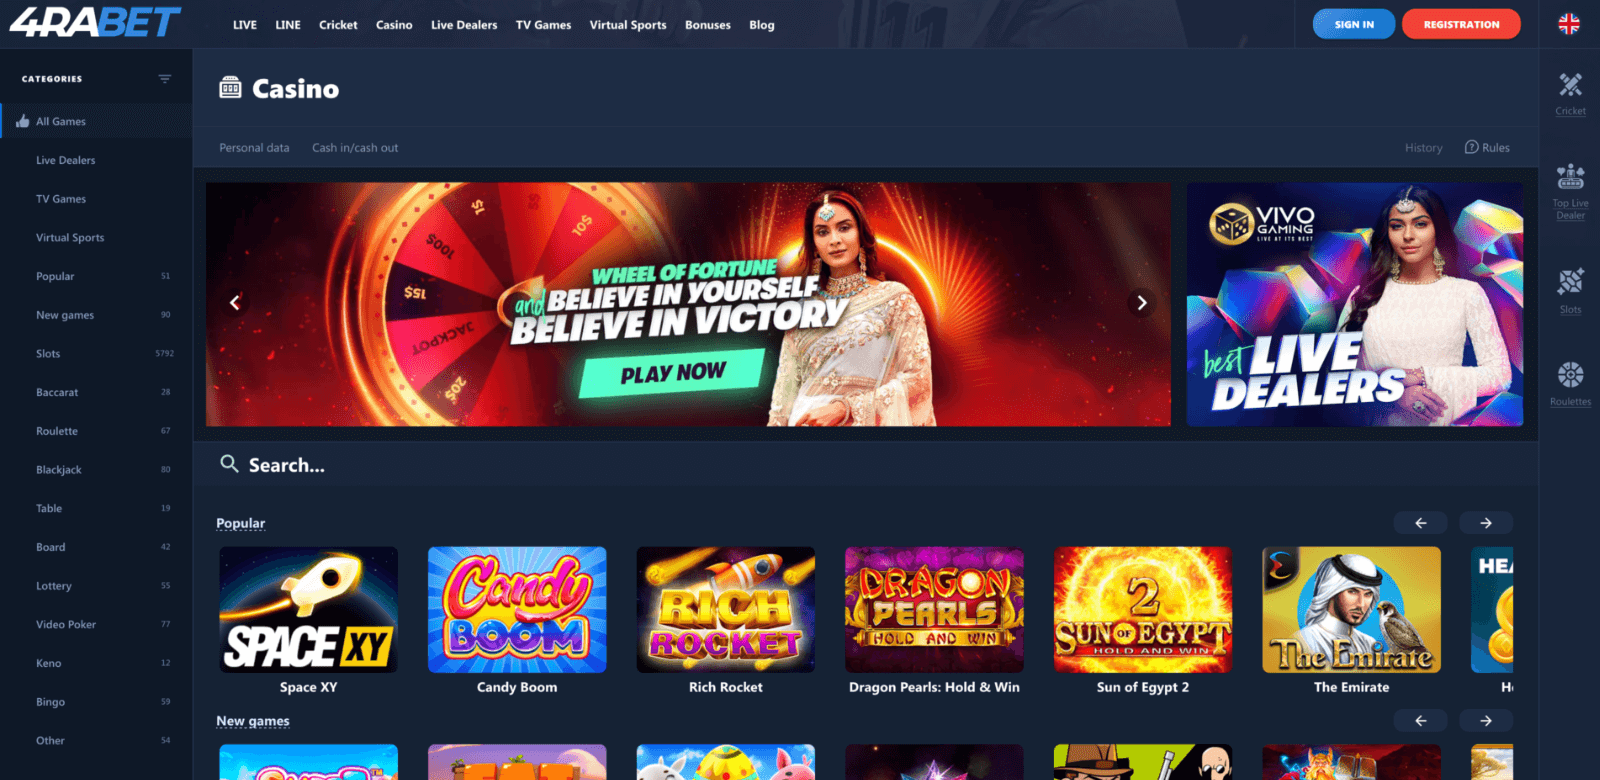 4rabet: The Casino Site That Offers The Best Customer Service For Indian Players